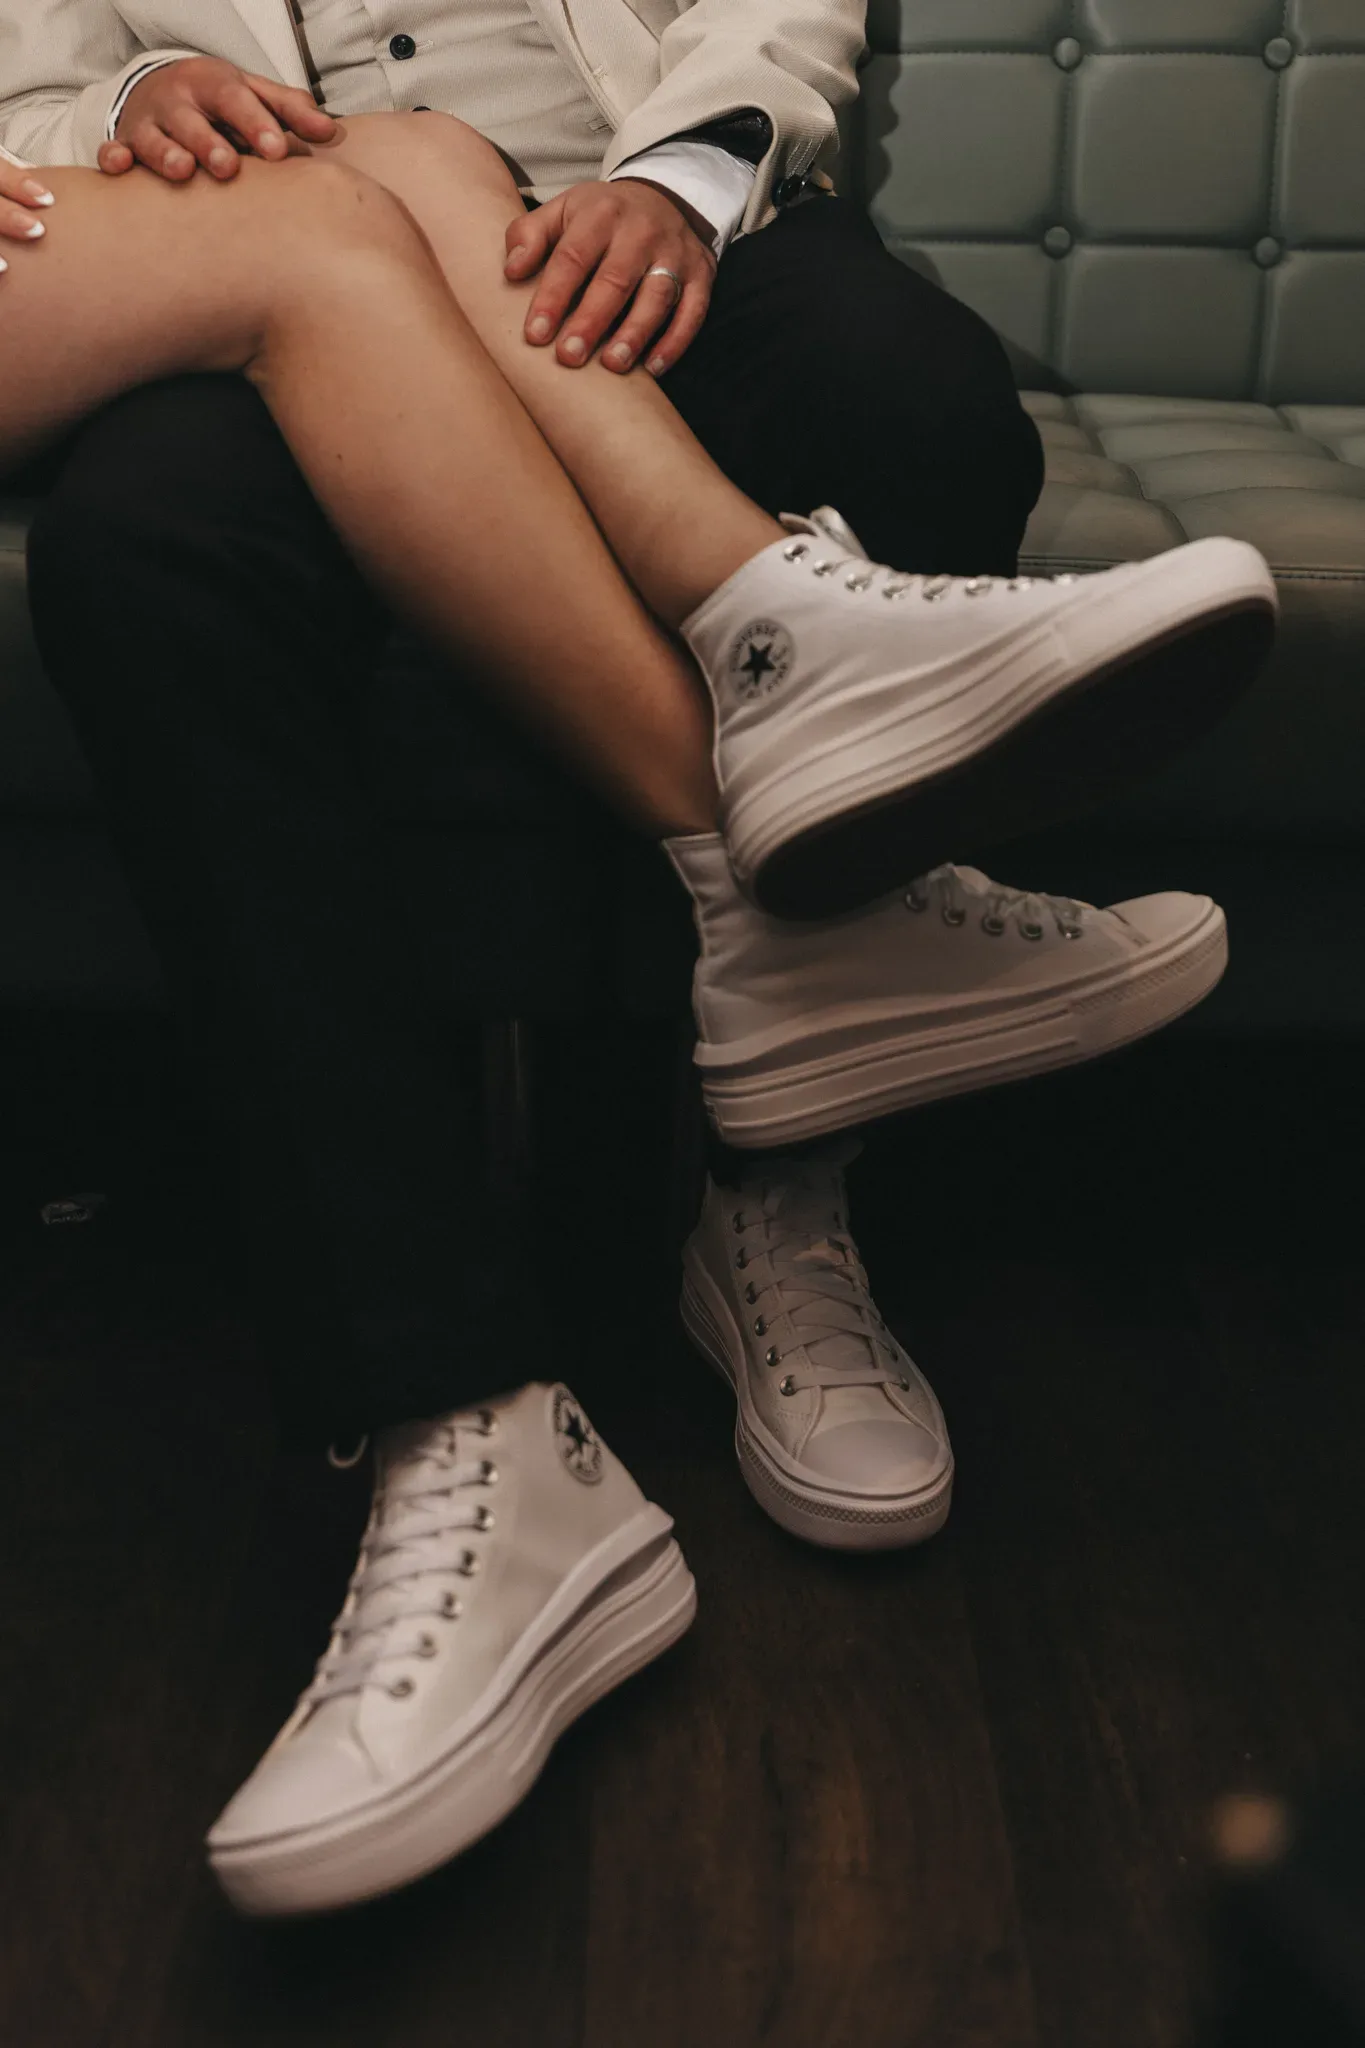 A couple sits closely on a green tufted couch, with focus on their white converse sneakers. one person wears black pants and the other a cream outfit; their hands gently touch.